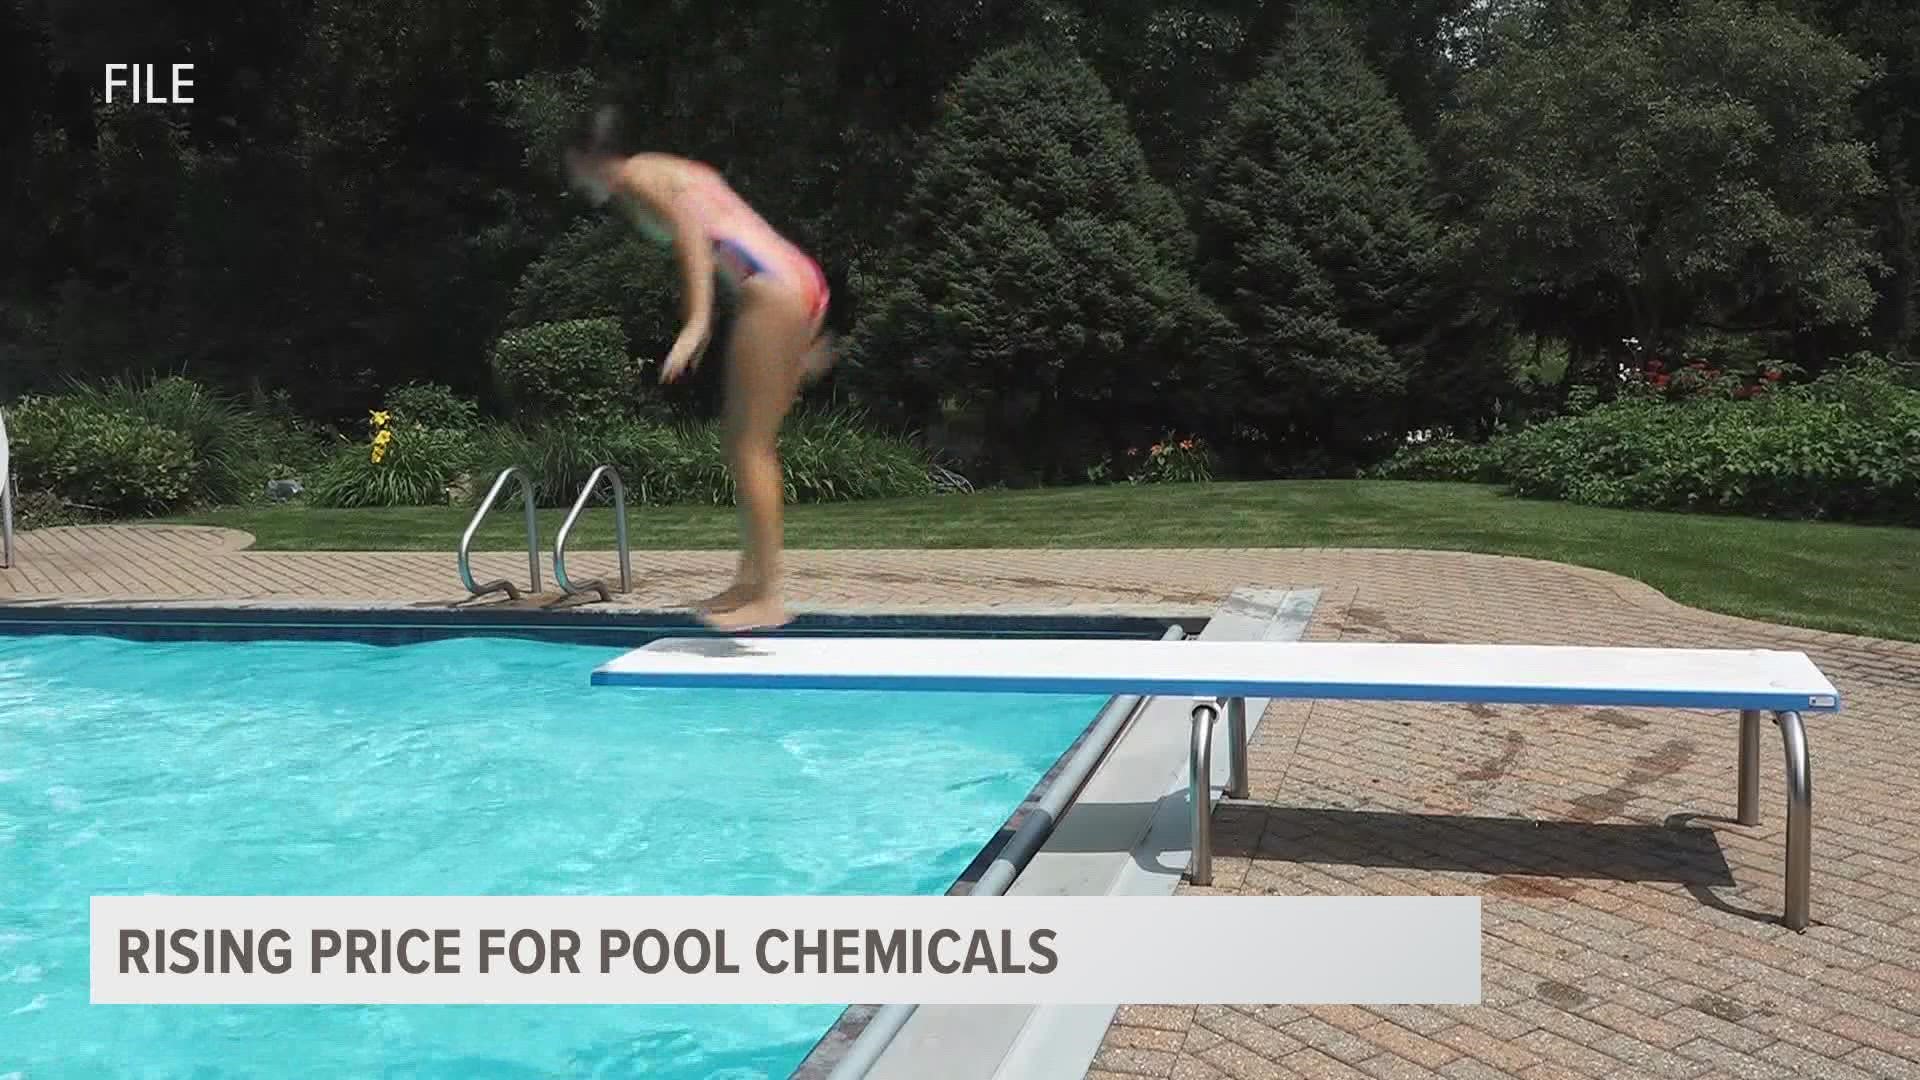 It all started with a chlorine shortage about two years ago, and while some local stores have supply back in stock, it's at a higher price point.